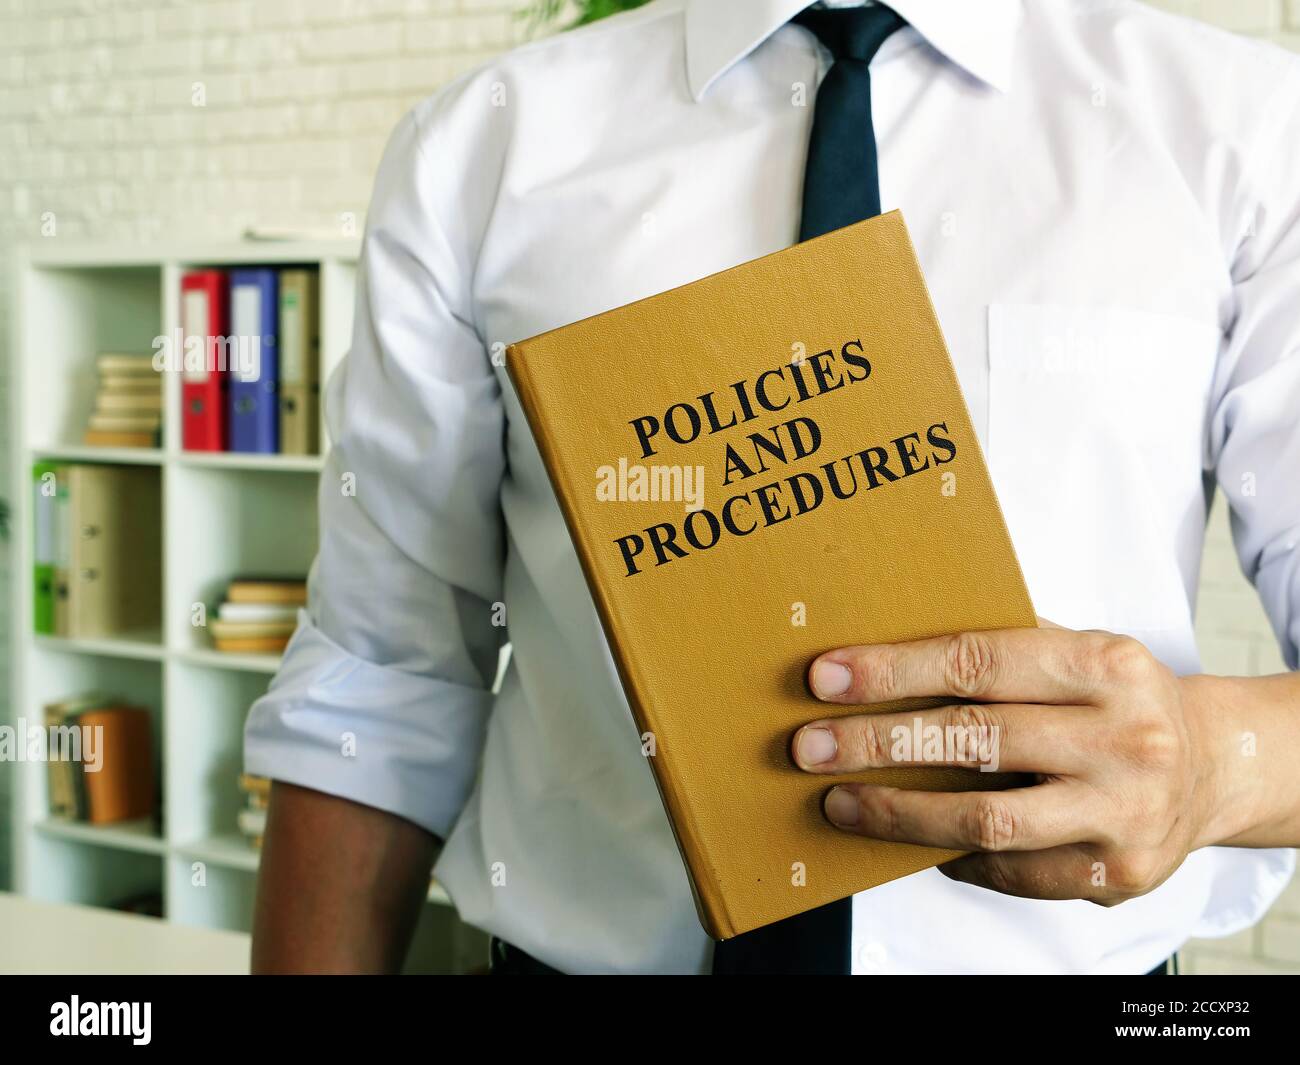 The manager offers Policies and procedures book. Stock Photo